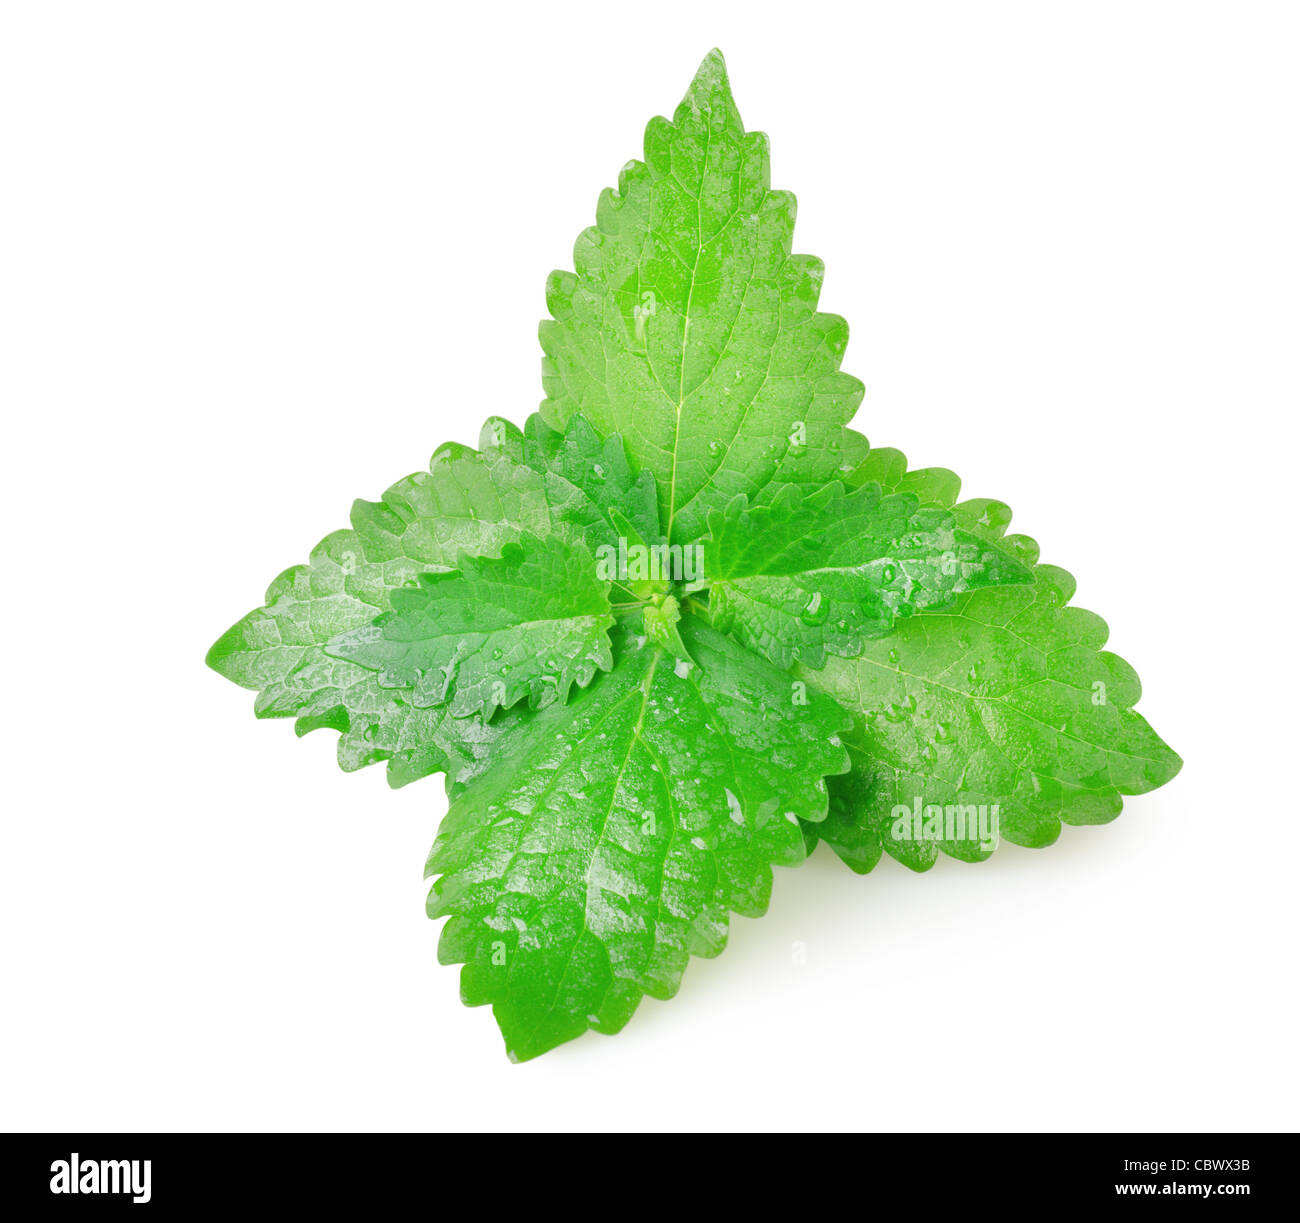 Green mint leaves isolated on white background Stock Photo